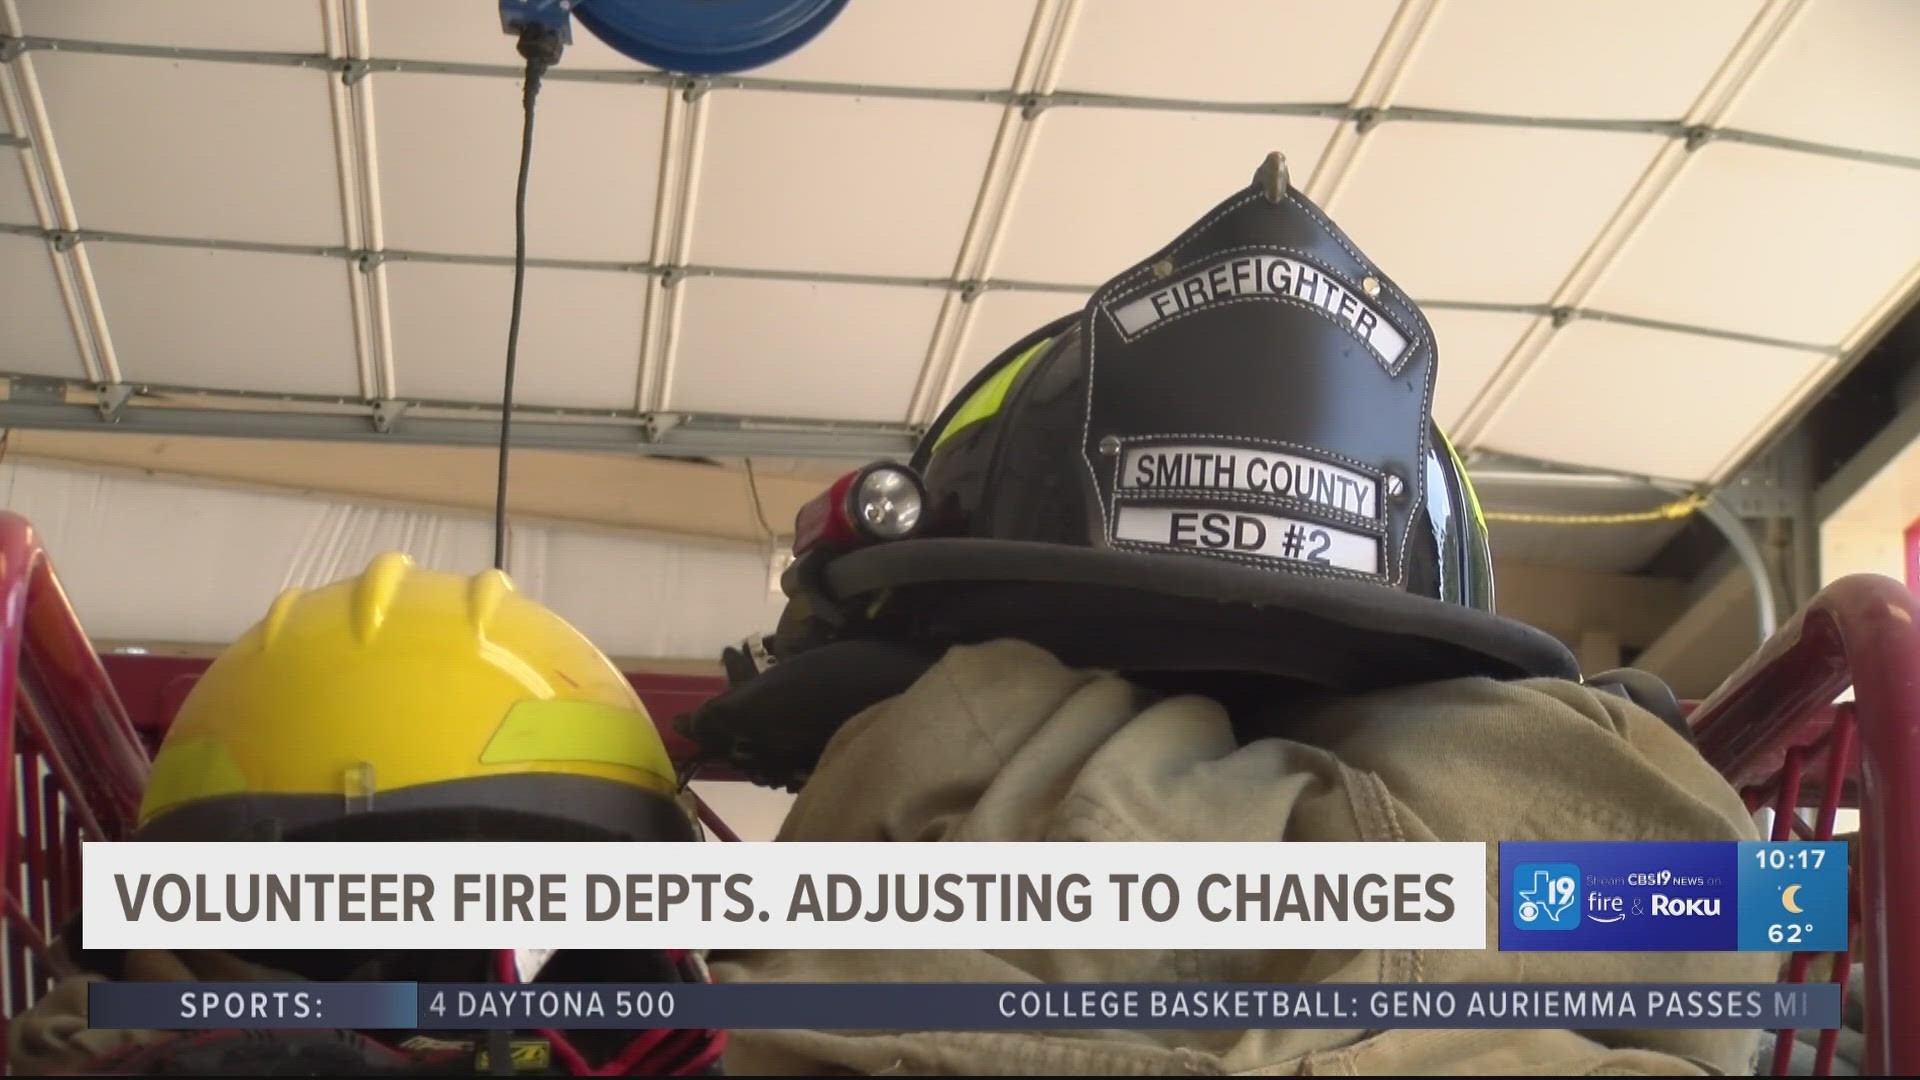 A lack of funding for volunteer fire departments is one of the reasons there has been an increase of emergency services districts, the Smith County ESD2 chief said.